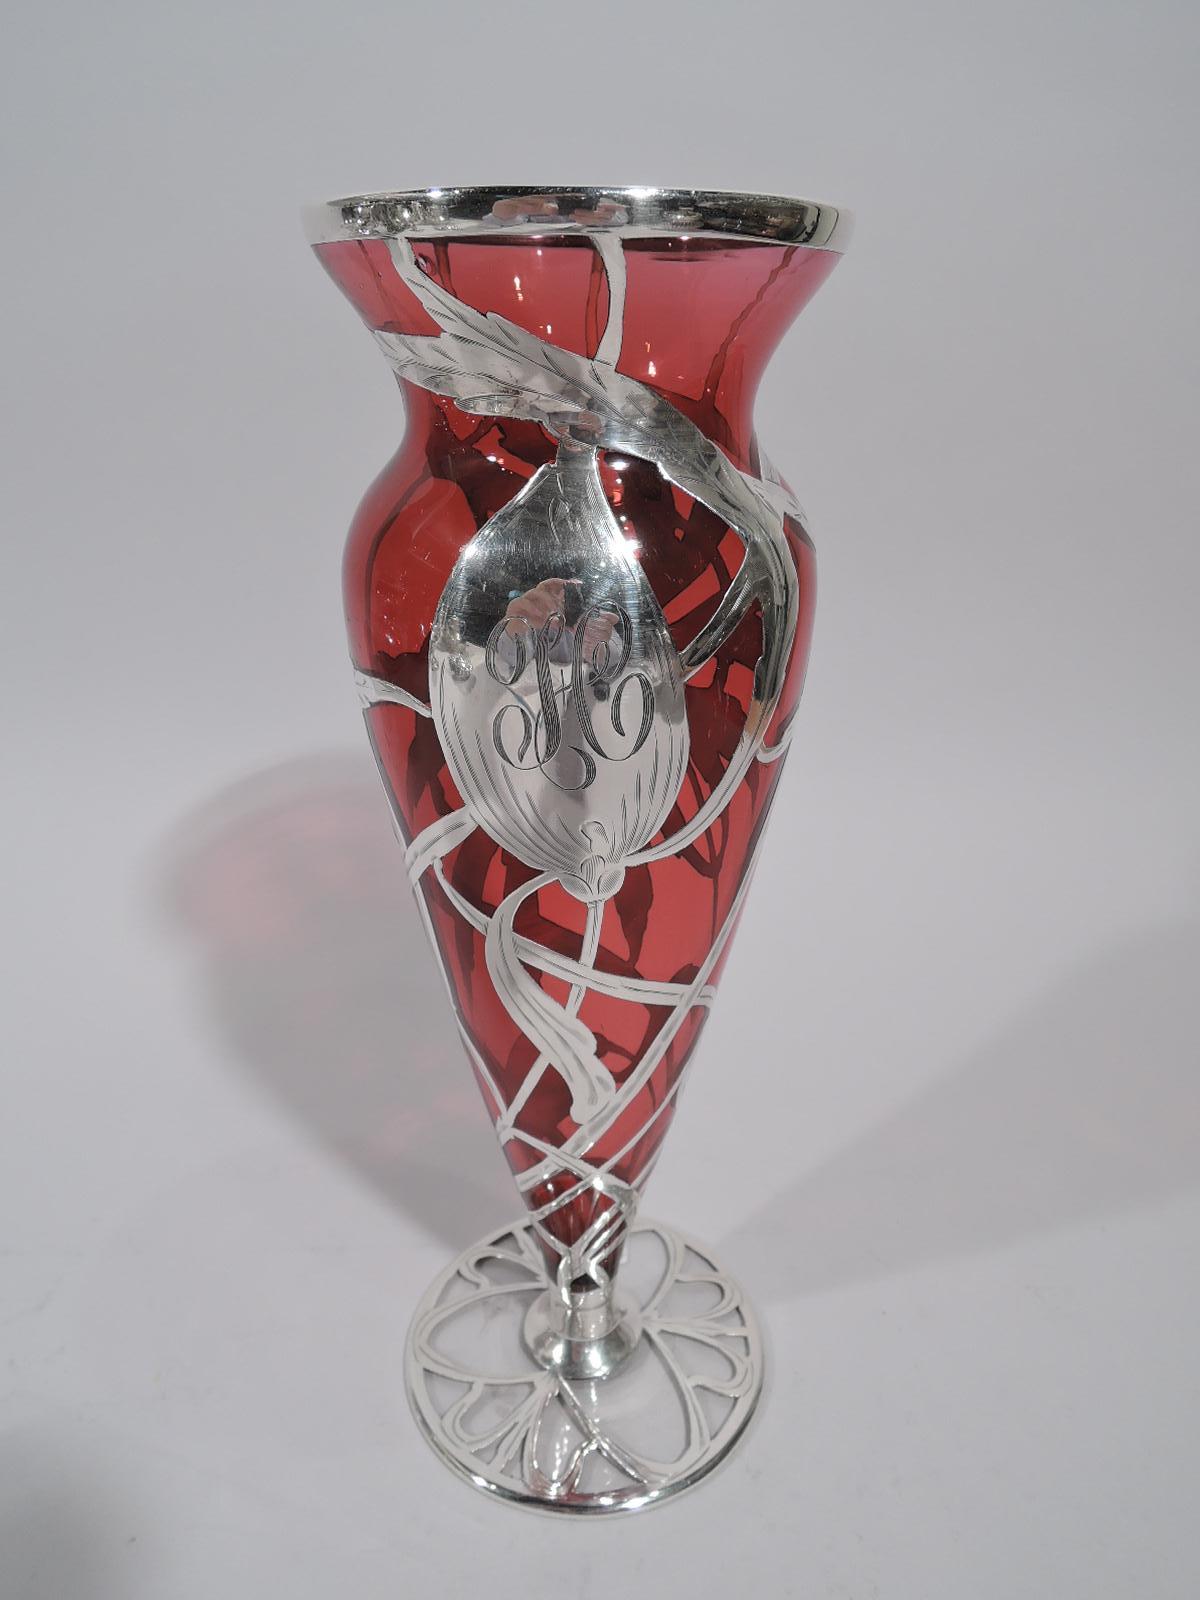 Turn-of-the-century American Art Nouveau glass vase with engraved silver overlay. Ovoid with flat round foot and flared mouth. Floral overlay with splayed and serrated petals and bud (engraved with script monogram); interlaced and whiplash tendrils.